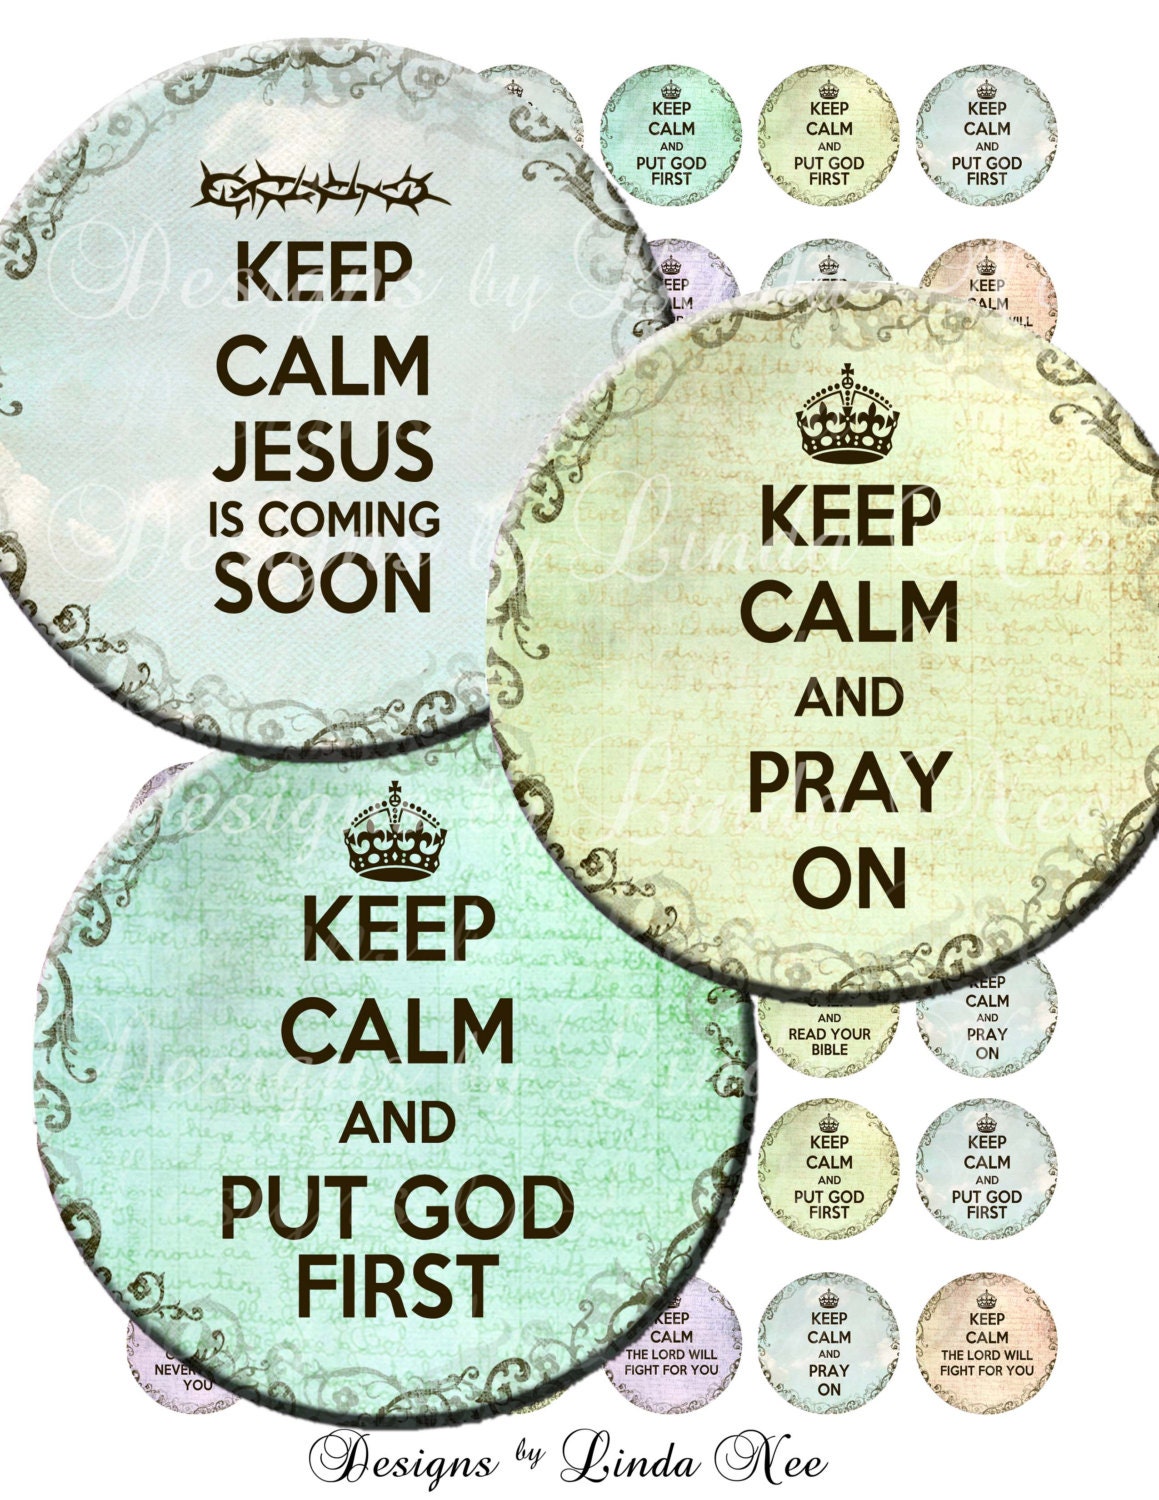 keep calm and carry on in christ